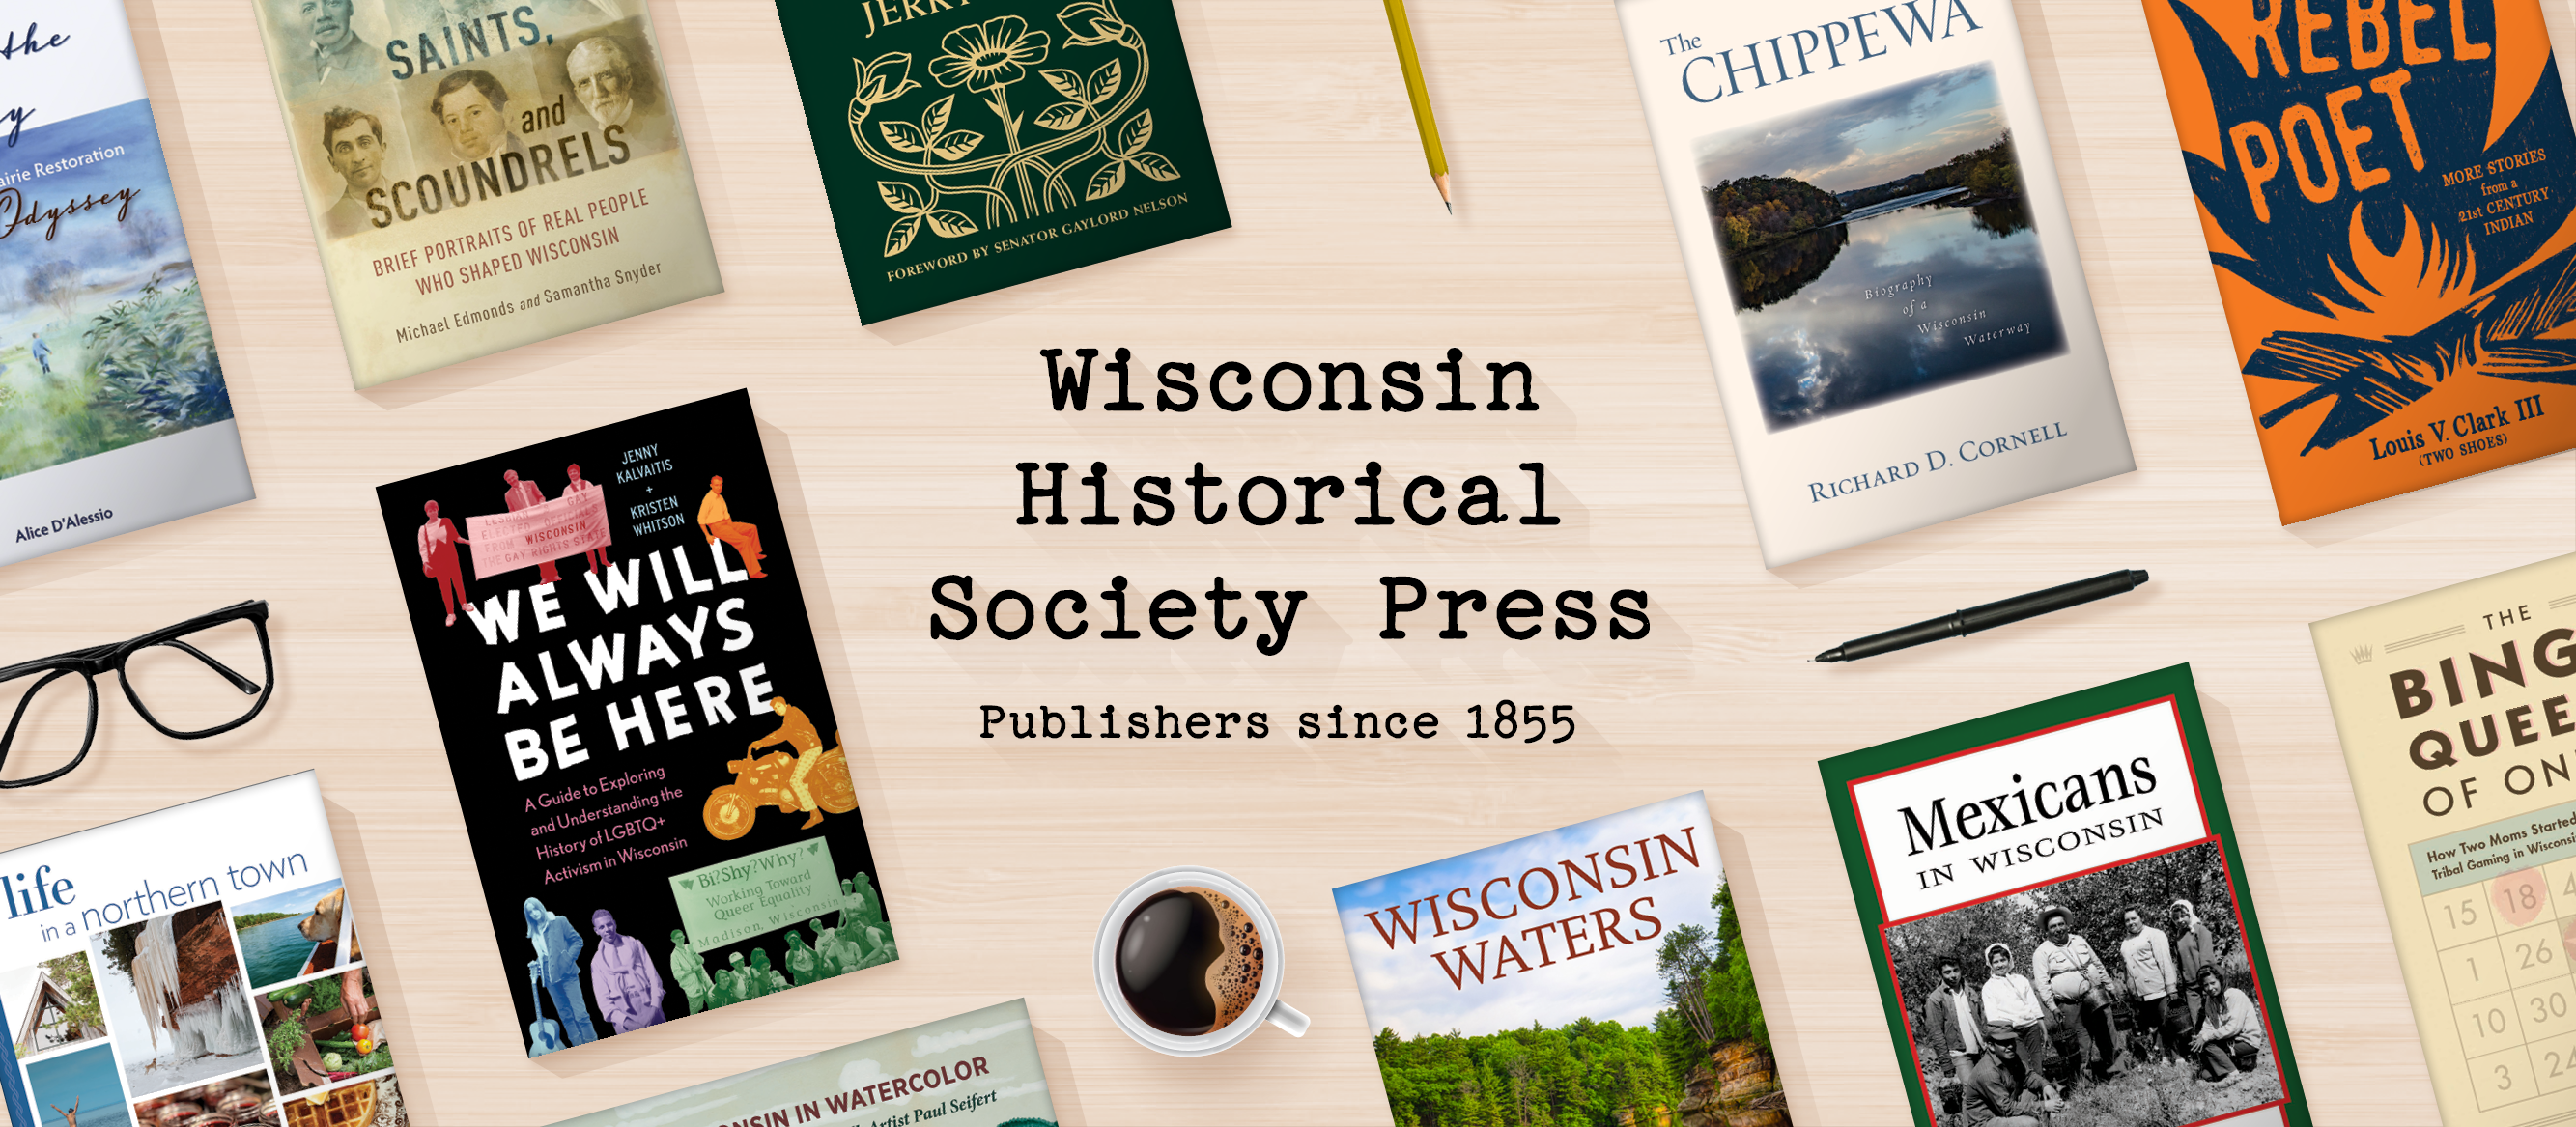 Wisconsin Historical Society Press - Publishers since 1855 - Authors Page 